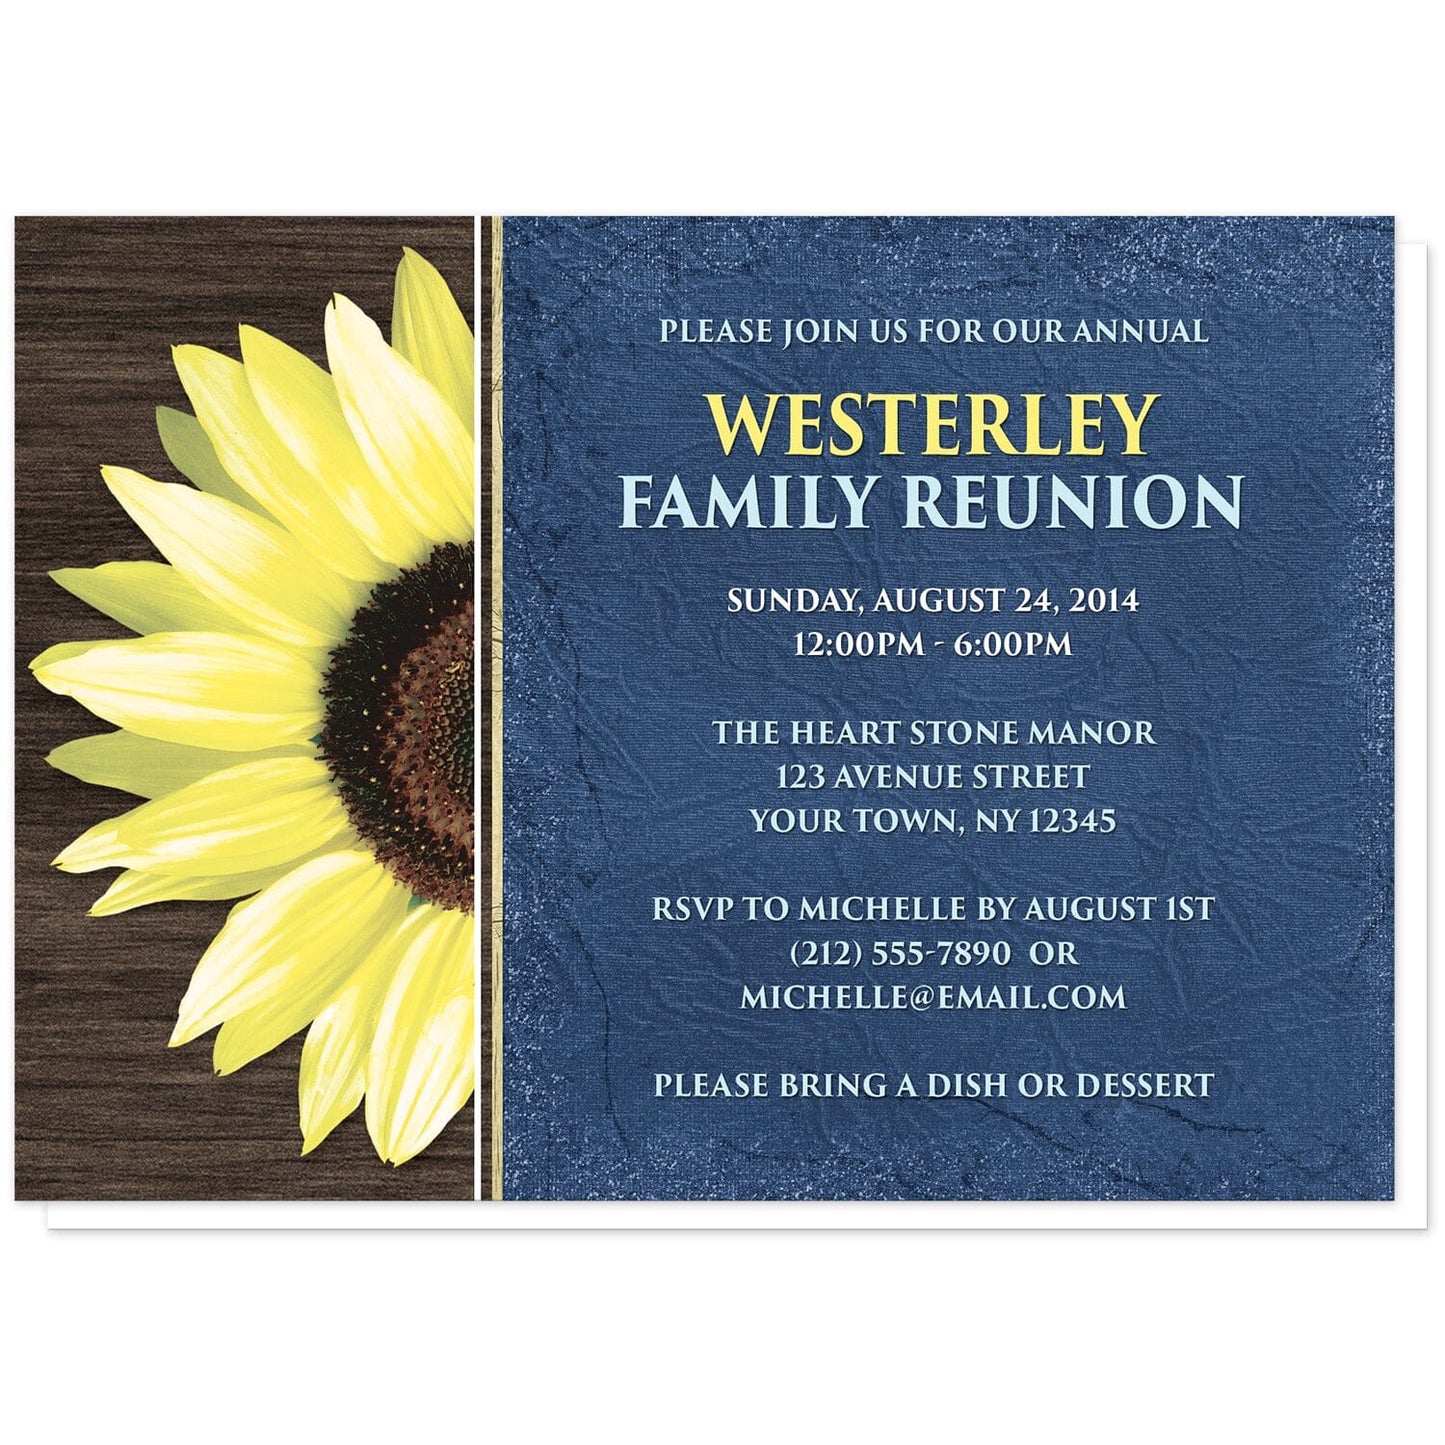 Rustic Sunflower with Blue Family Reunion Invitations at Artistically Invited. Country-inspired rustic sunflower with blue family reunion invitations featuring a vibrant bright yellow sunflower over a textured dark brown wood design along the left side. Your personalized reunion celebration details are custom printed in yellow and white over a tattered blue cloth illustration to the right of the sunflower.